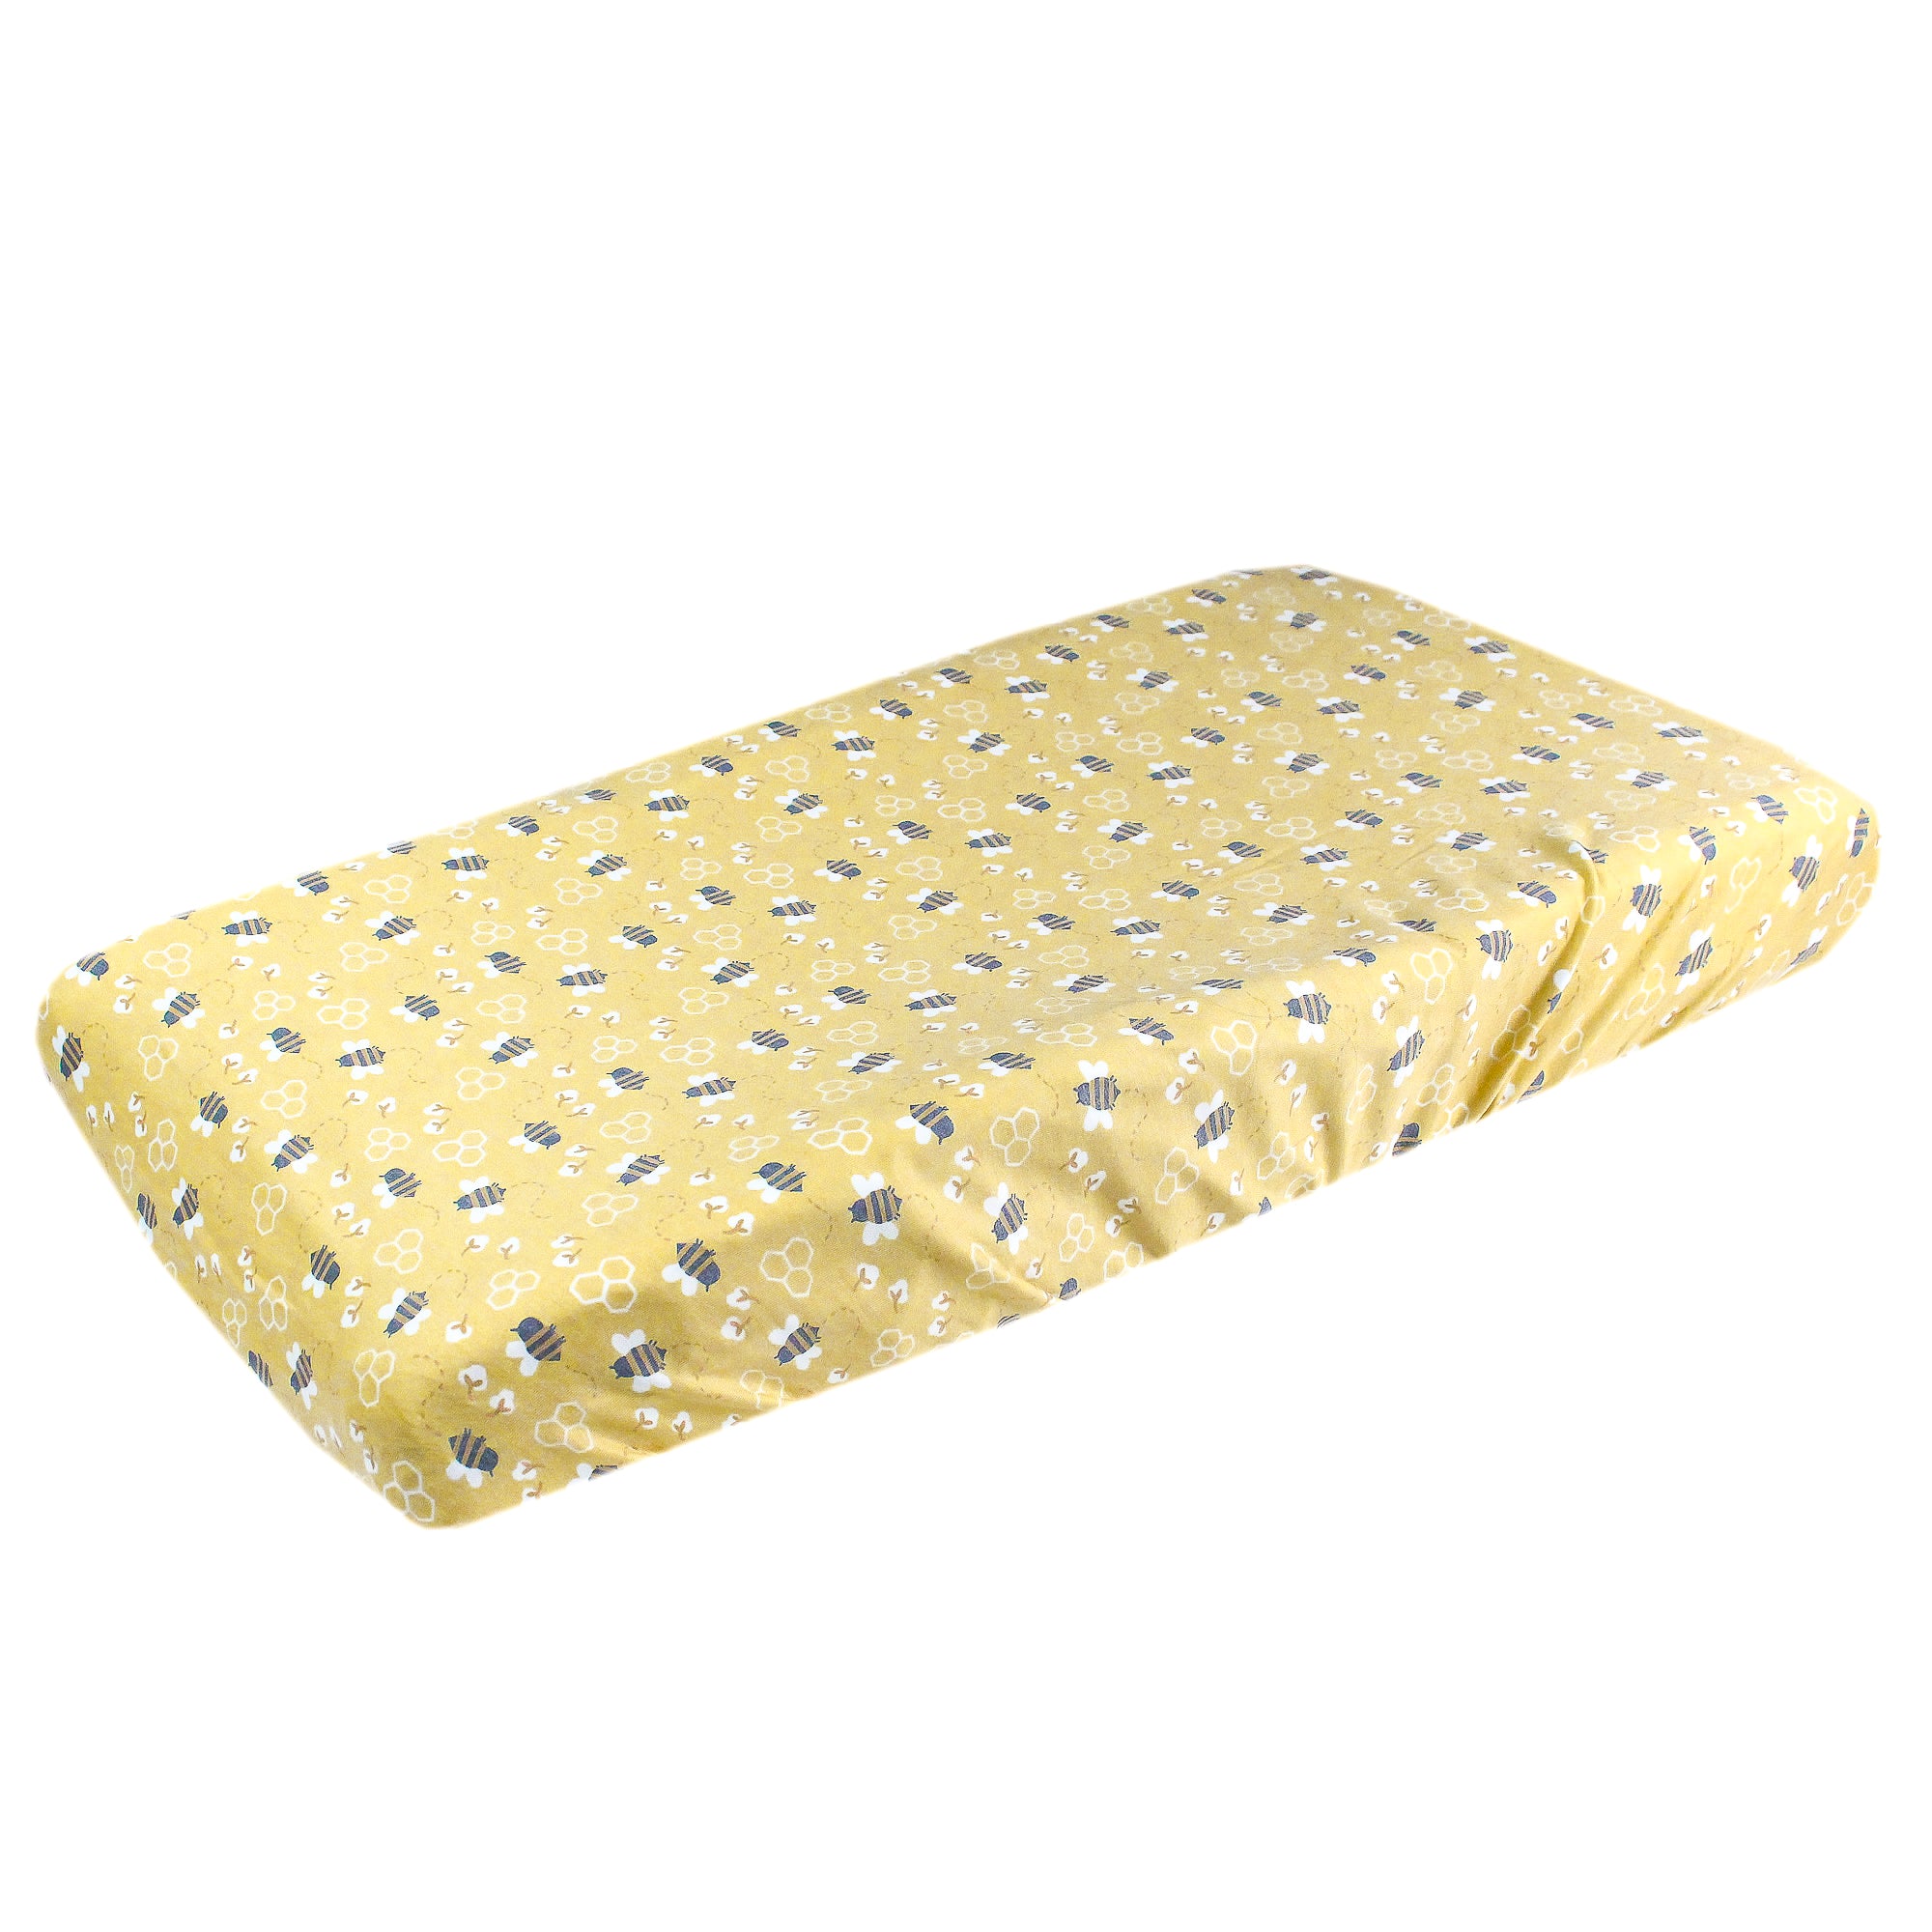 Premium Knit Diaper Changing Pad Cover - Honeycomb